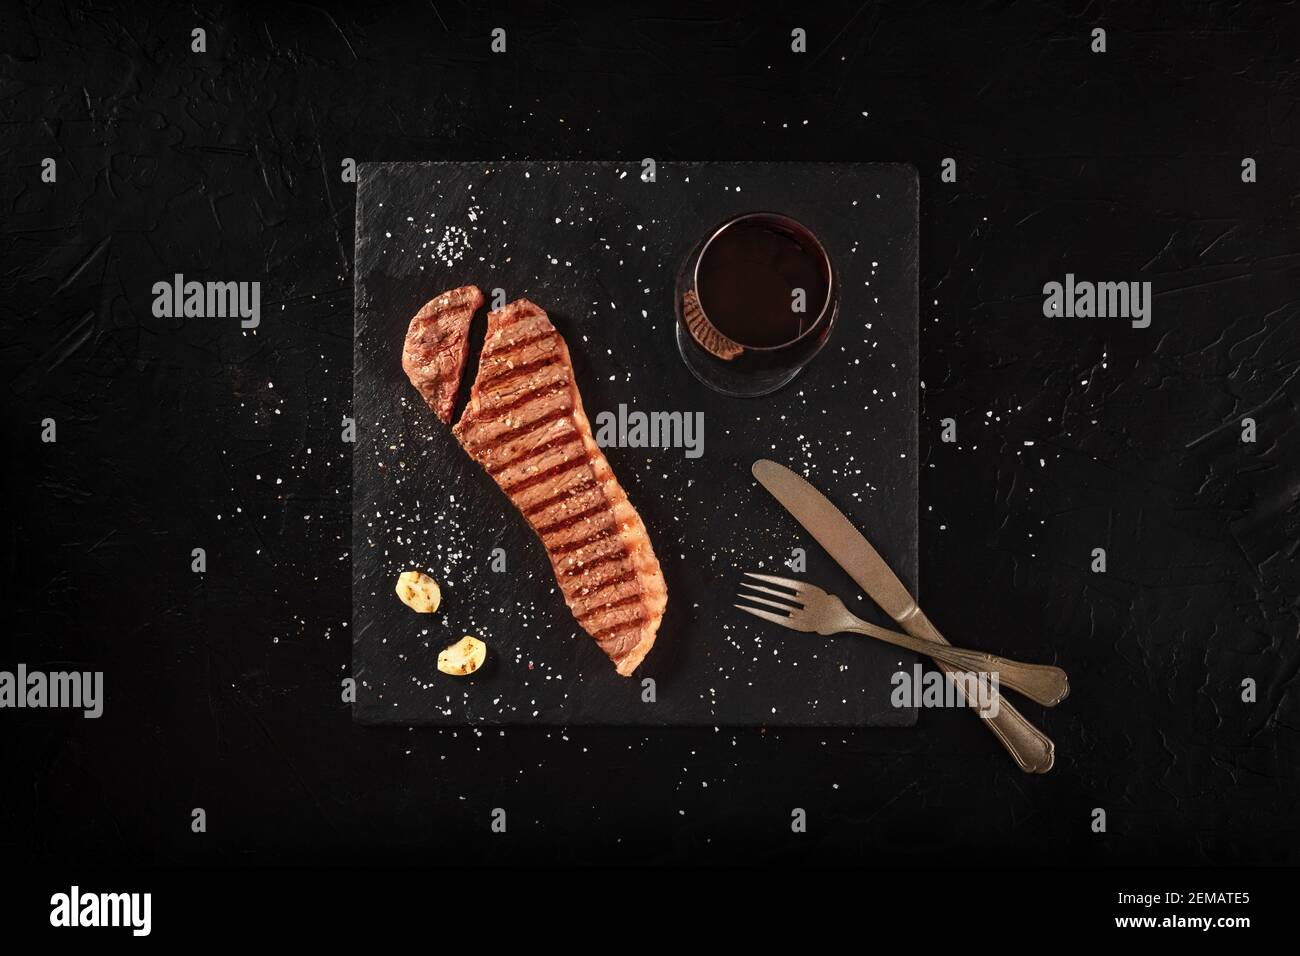 Strip beef steak, cut, shot from the top on a black background, with a glass of wine Stock Photo